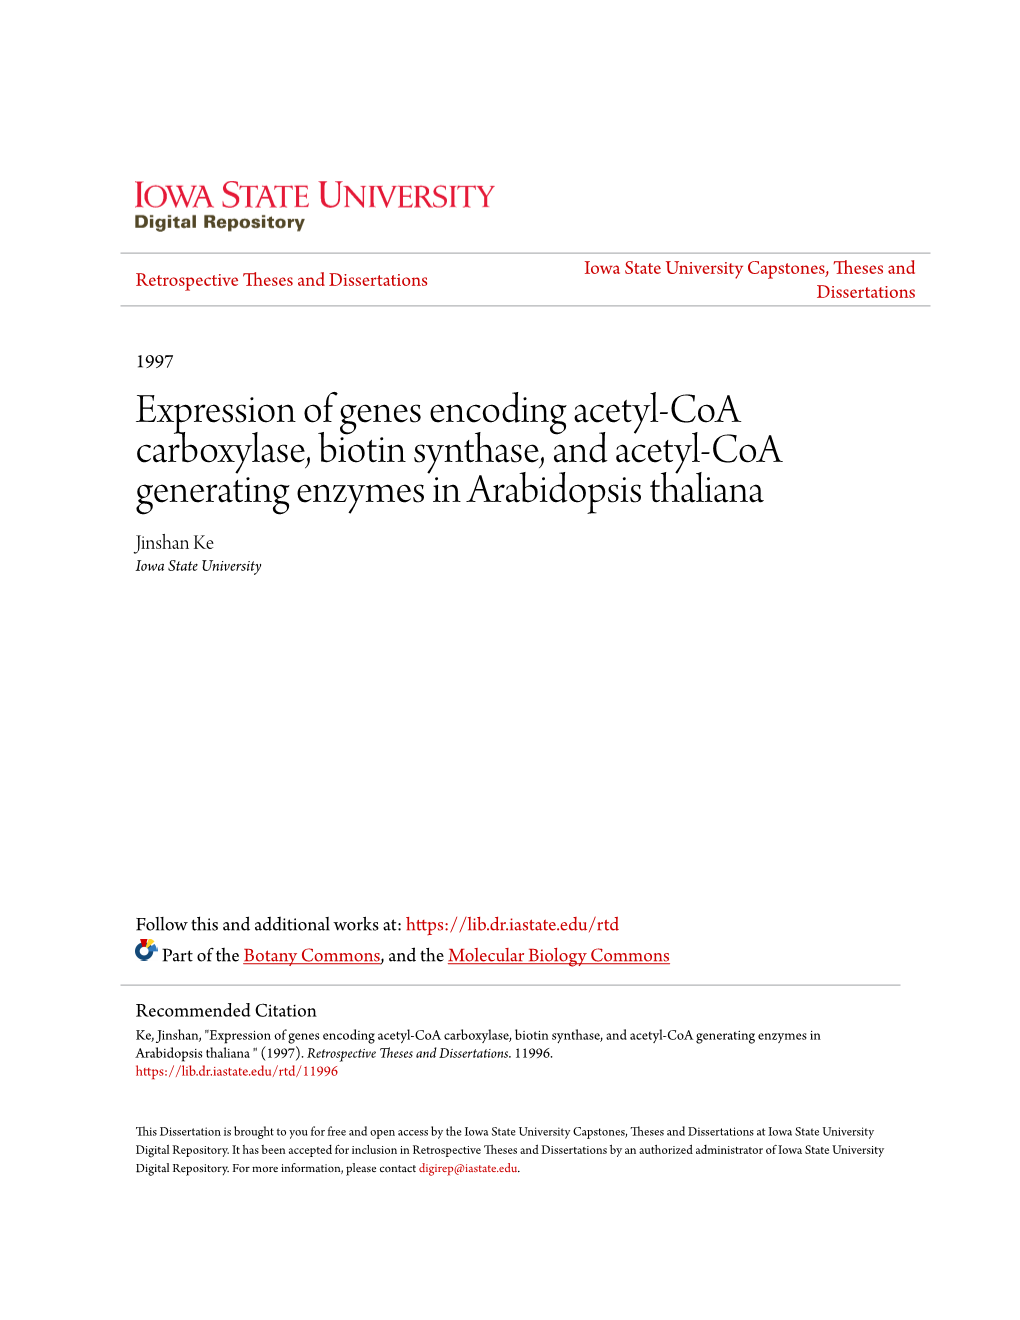 Expression of Genes Encoding Acetyl-Coa Carboxylase, Biotin Synthase, and Acetyl-Coa Generating Enzymes in Arabidopsis Thaliana Jinshan Ke Iowa State University